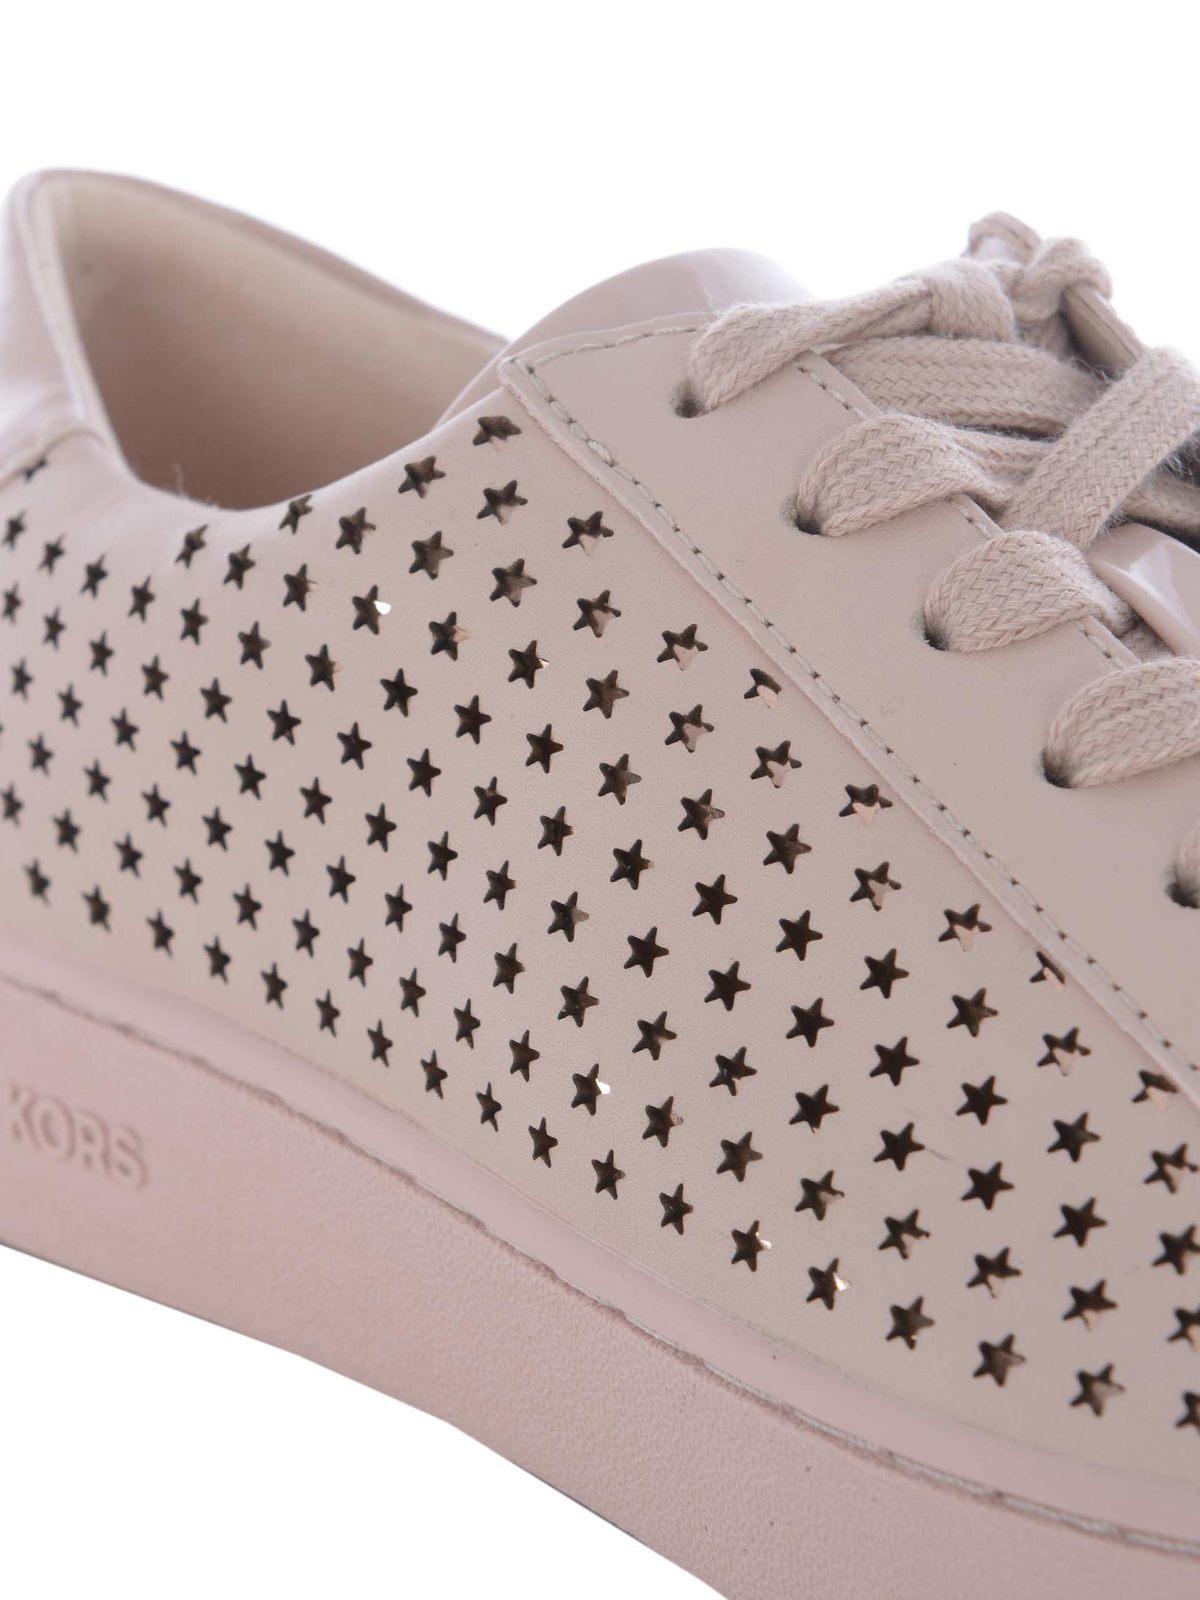 Trainers Michael Kors - Irving cut-out stars pink - 43R8IRFS2L187